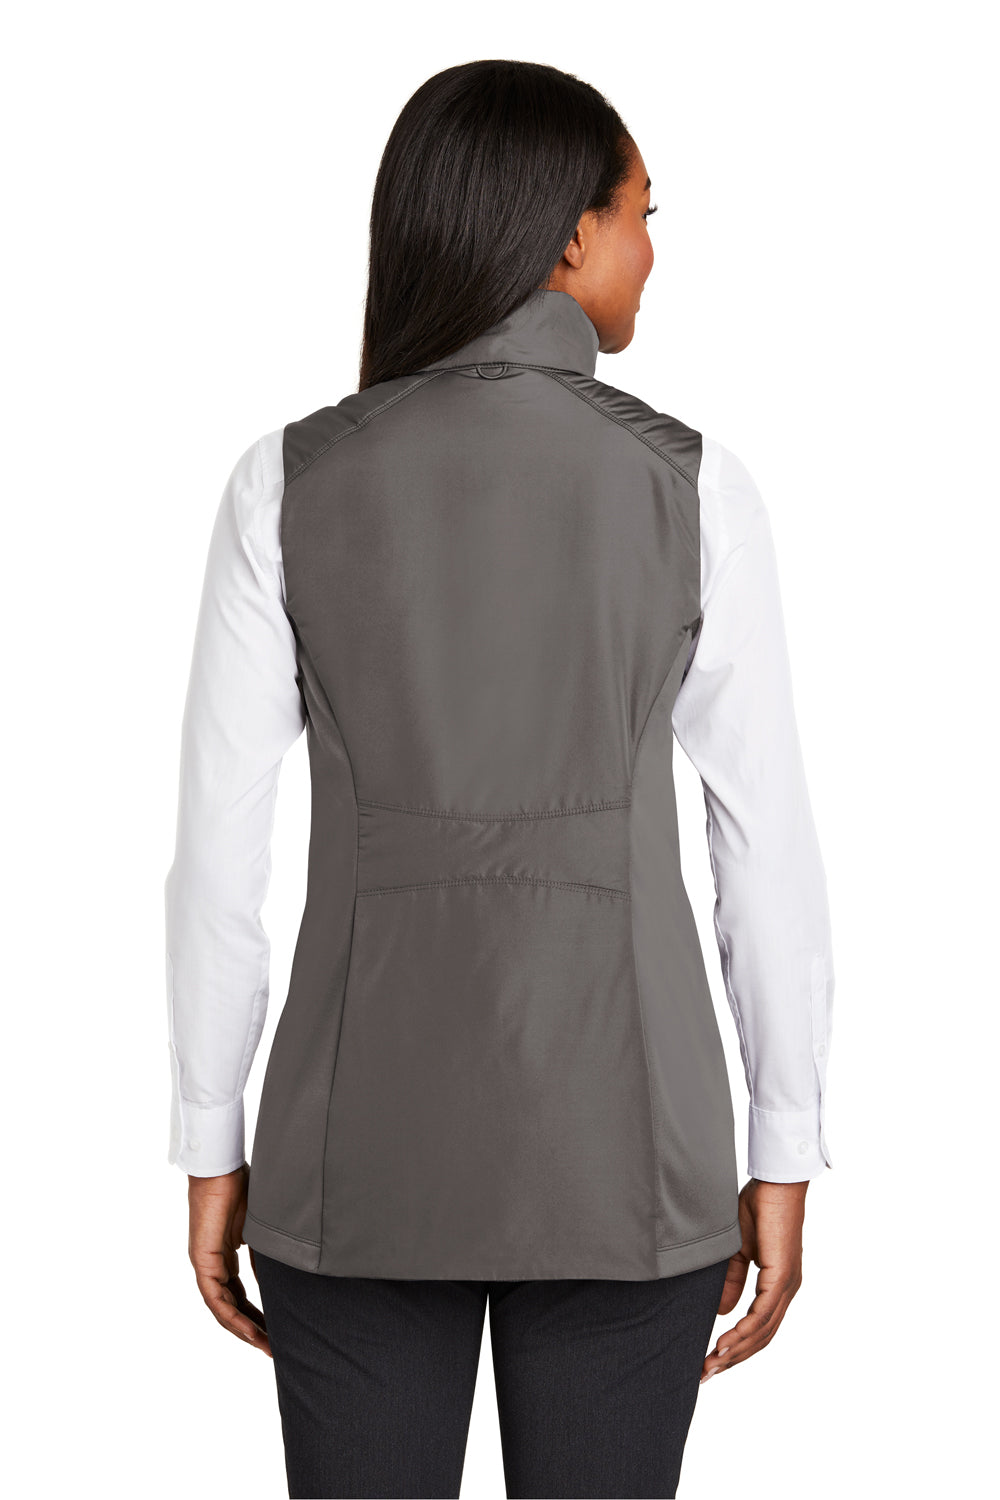 Port Authority L903 Womens Collective Wind & Water Resistant Full Zip Vest Graphite Grey Back